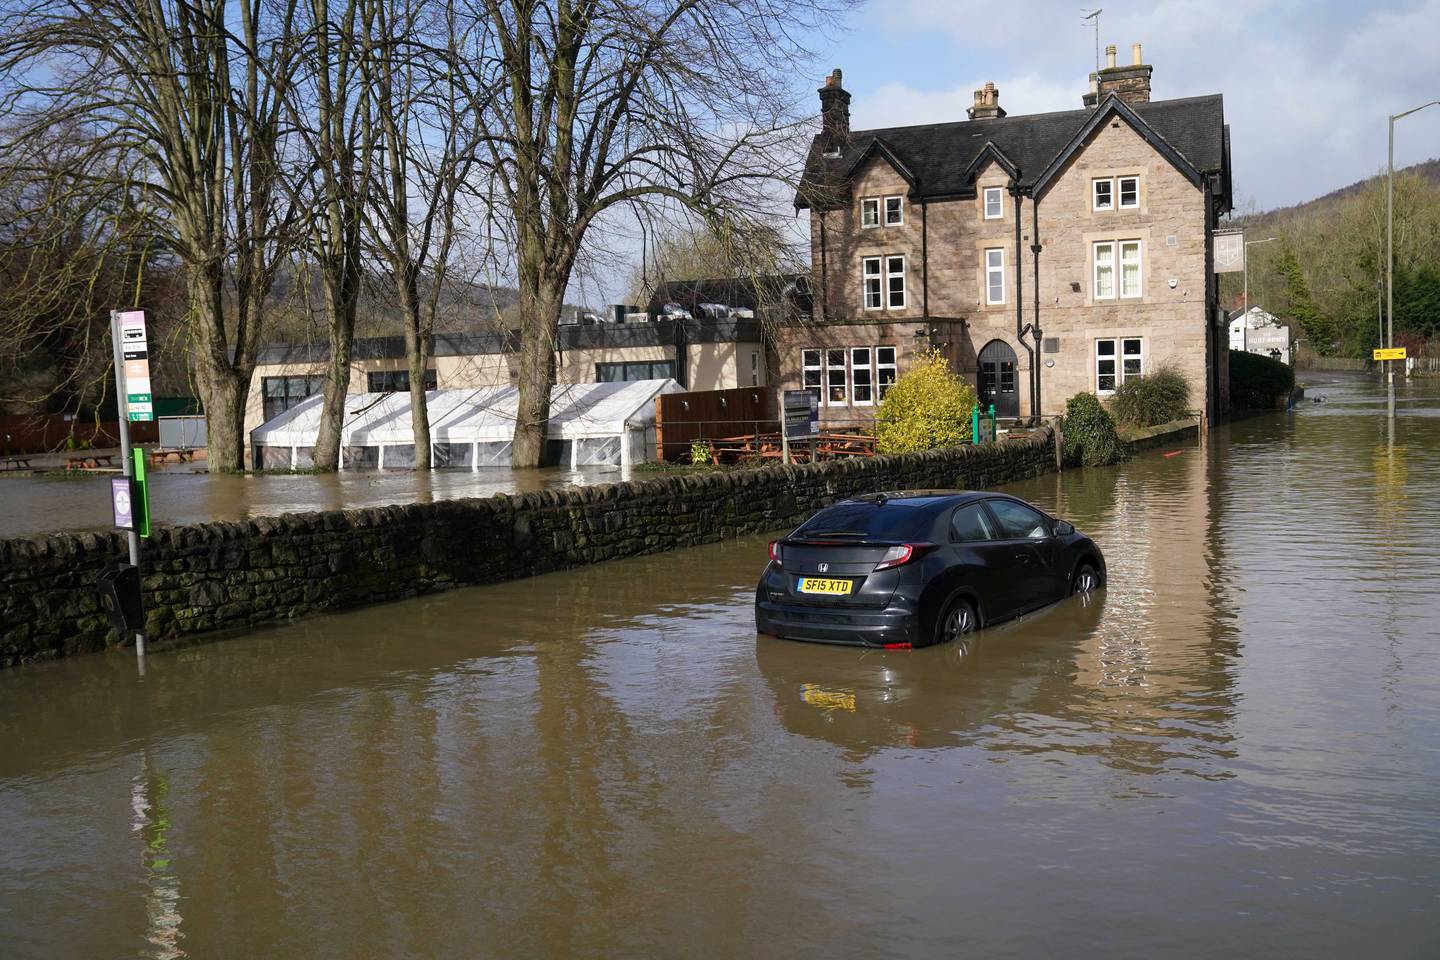 A car stranded in flood waters in Belper, Derbyshire, on Monday after Storm Franklin brought downpours and strong winds. PA